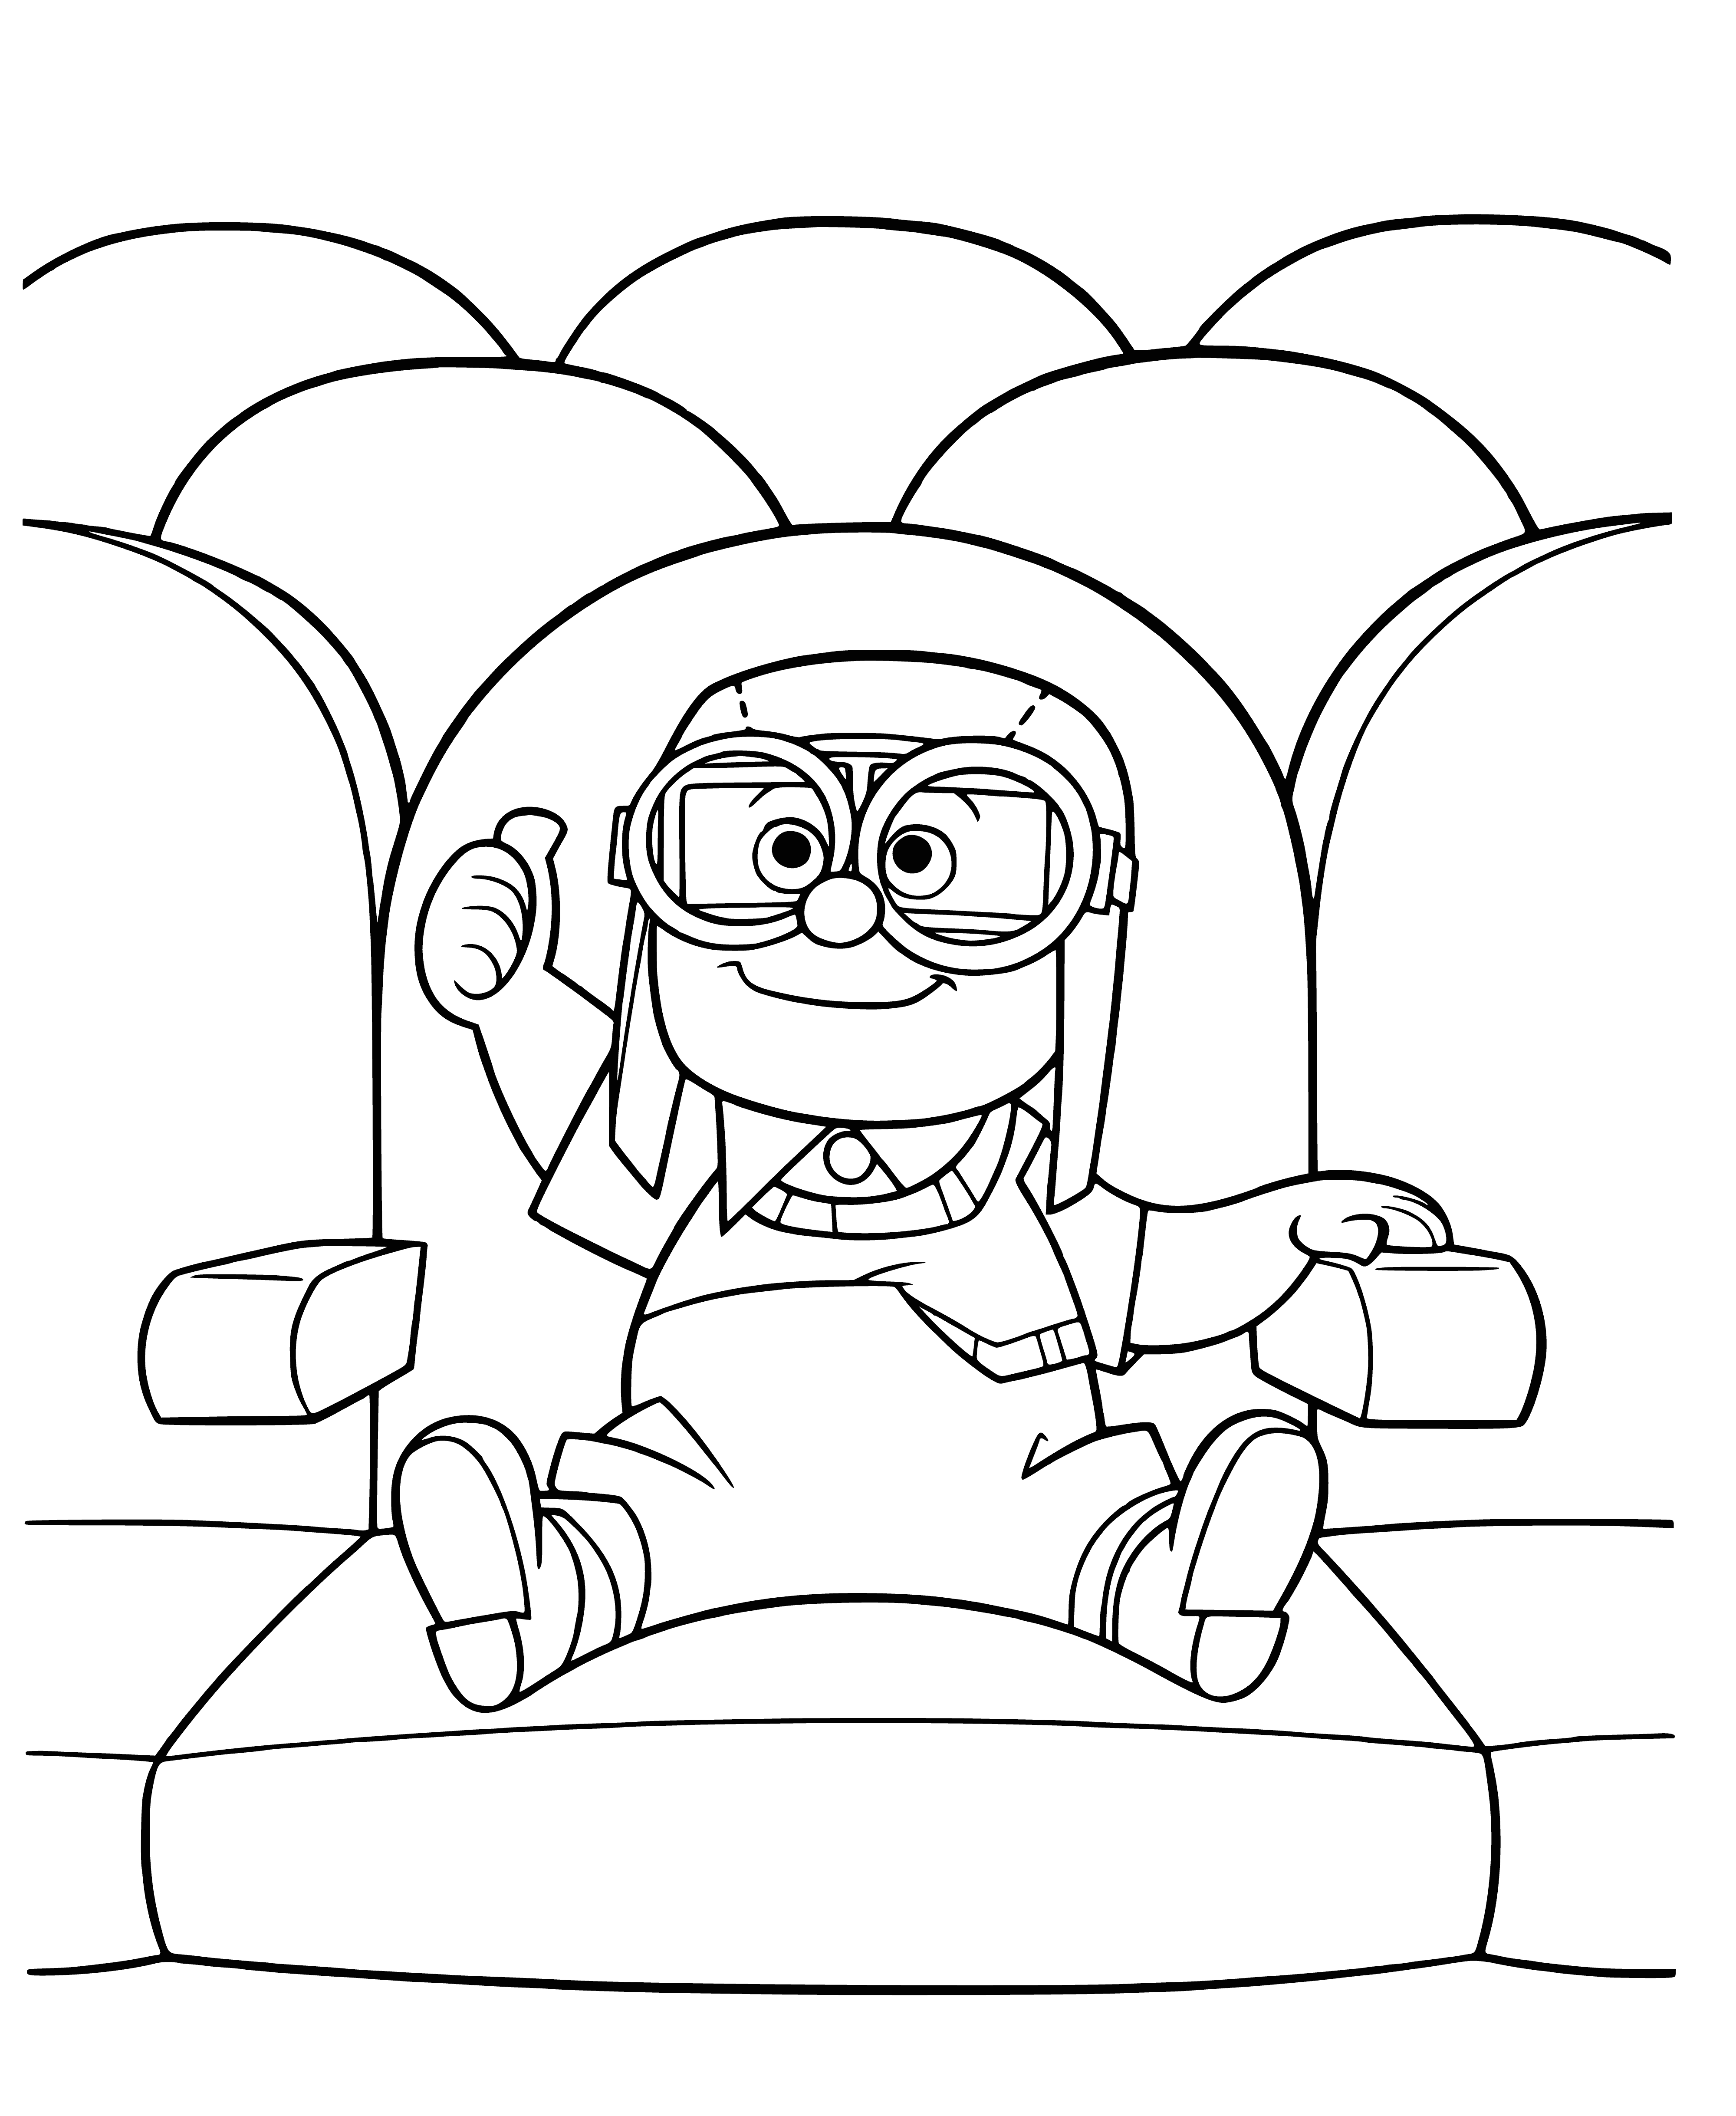 coloring page: Small boy Karl standing on a chair in a red shirt & black pants looking up at something outside the window. #childhood #coloring